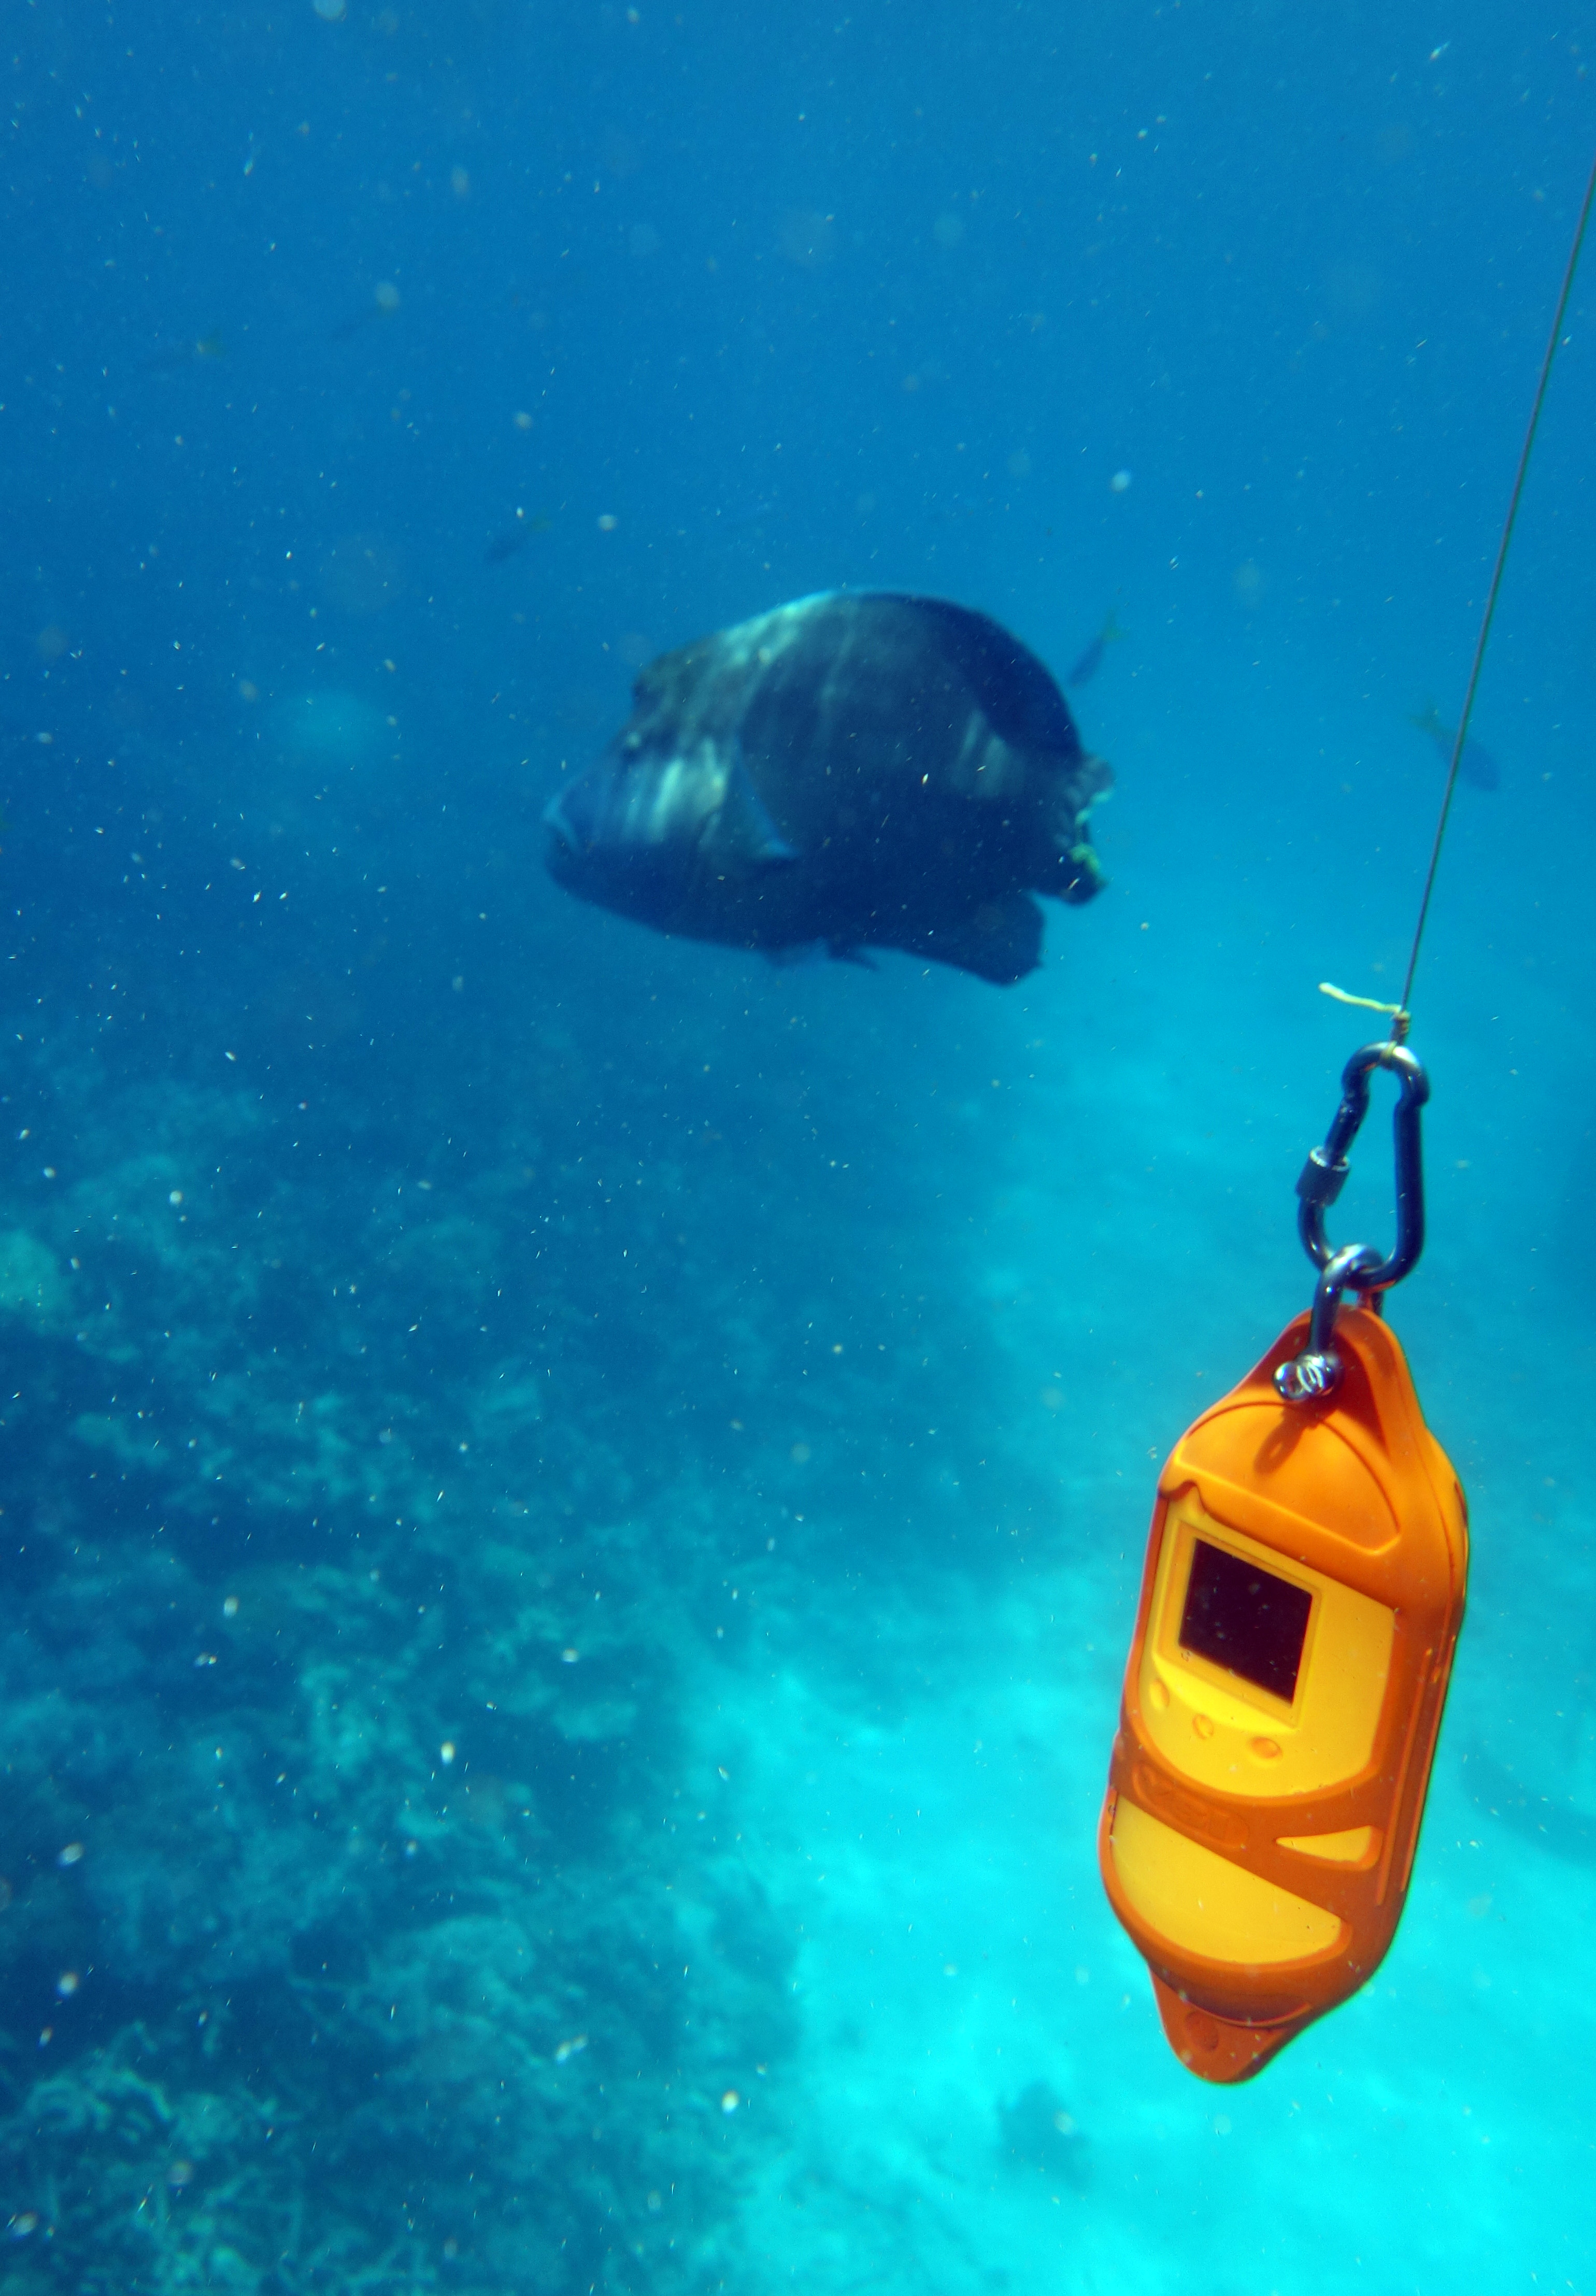 Oceanographic instrument measuring temperature, conductivity and salinity on coral reef with uninterested maori wrasse in background, Great Barrier Reef, Queensland, Australia. No PR